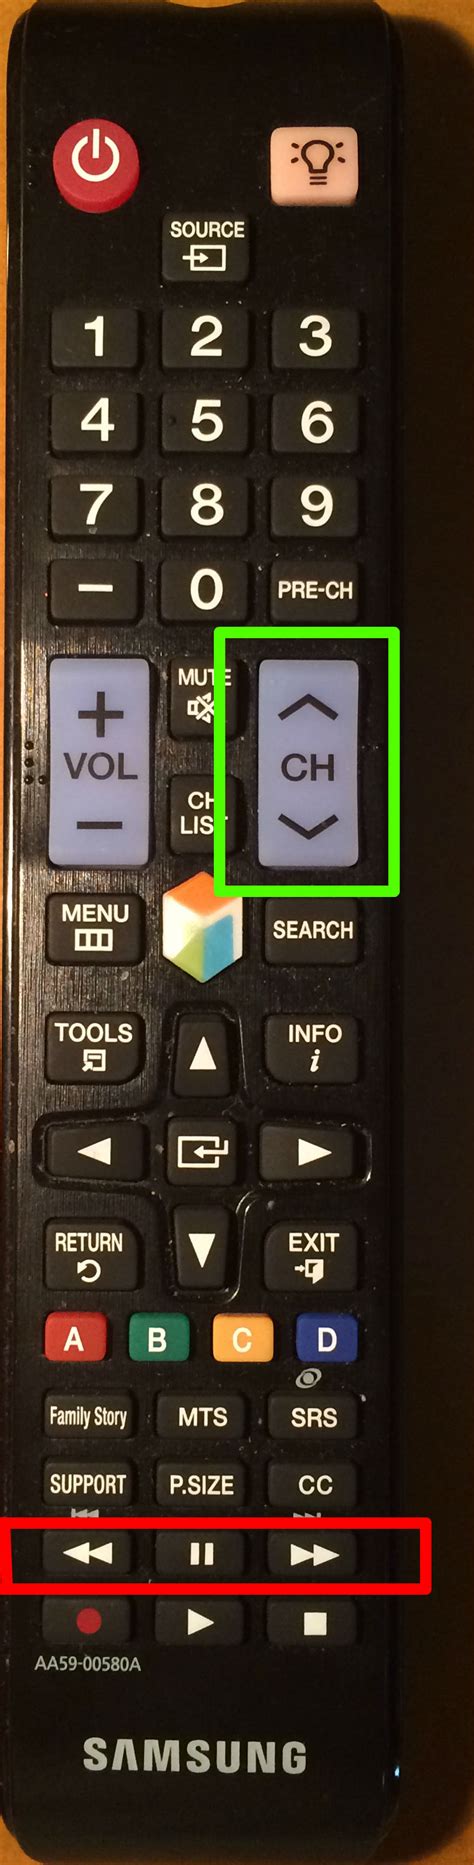 Samsung Smart Tv Remote Not Working Red Light Blinking